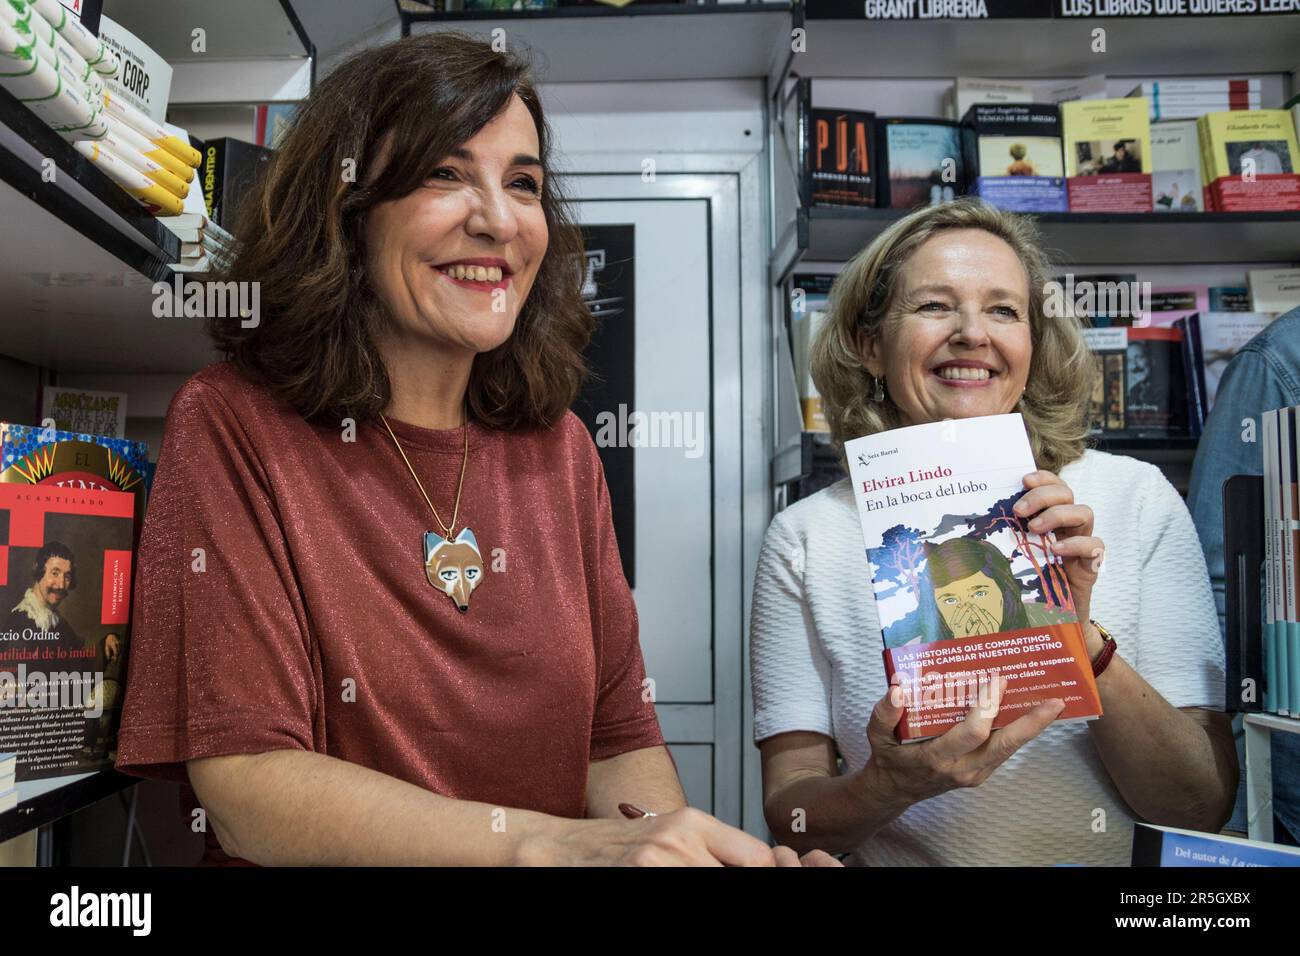 THE WRITER ELVIRA LINDO AND NADIA CALVIÑO VICE PRESIDENT OF THE GOVERNMENT AT THE 82ND EDITION OF THE BOOK FAIR IN EL RETIRO PARK, MADRID Credit: agefotostock /Alamy Live News Stock Photo